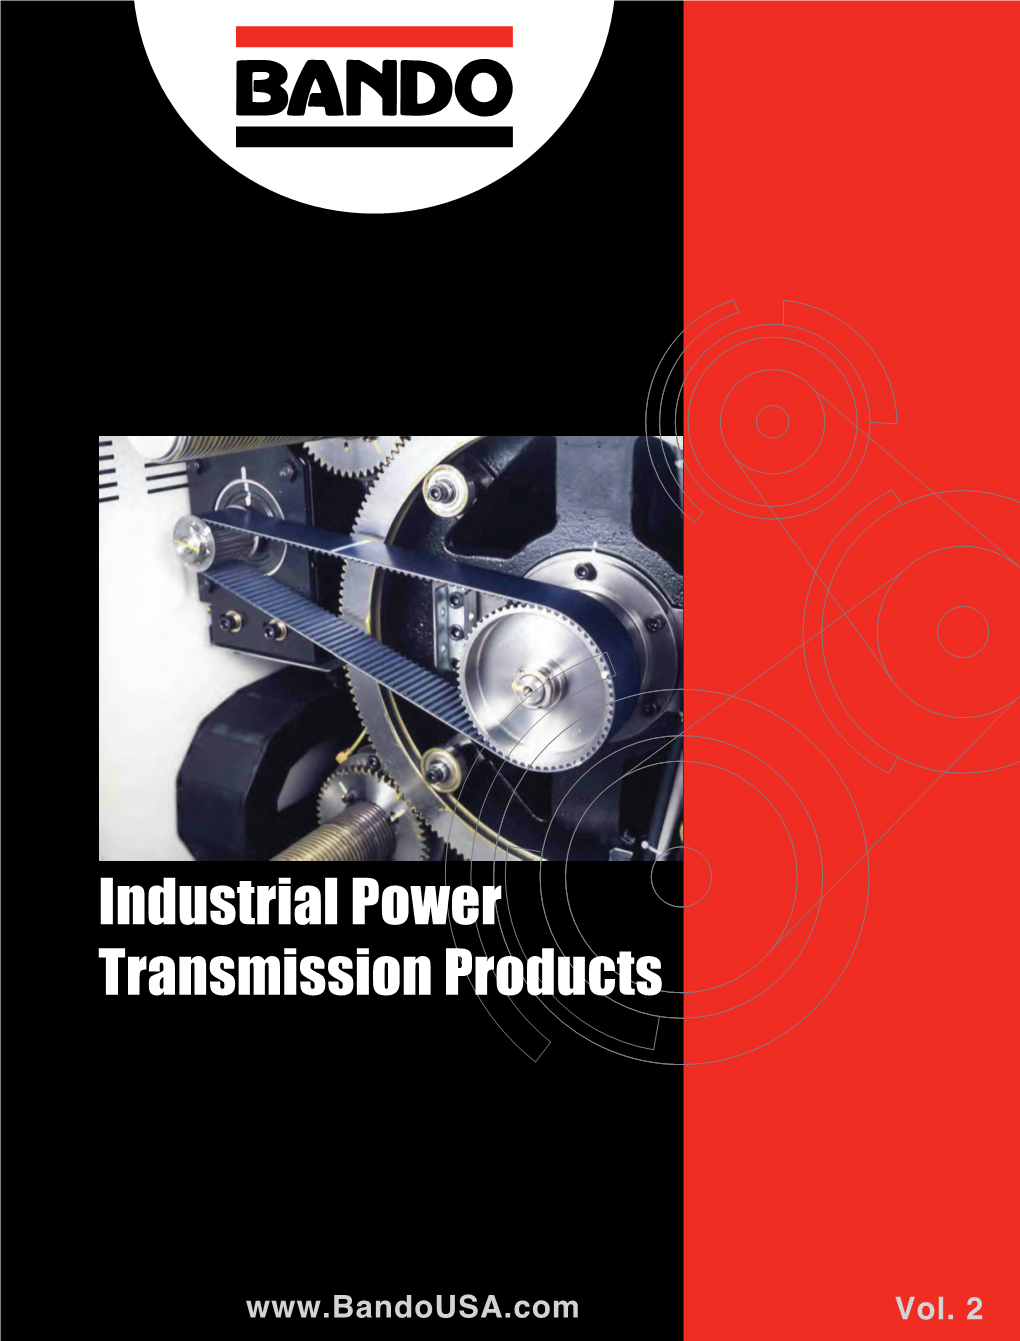 Industrial Power Transmission Products Vol 2 Cover Final-PMS 485C.Pdf 1 9/7/17 8:31 AM